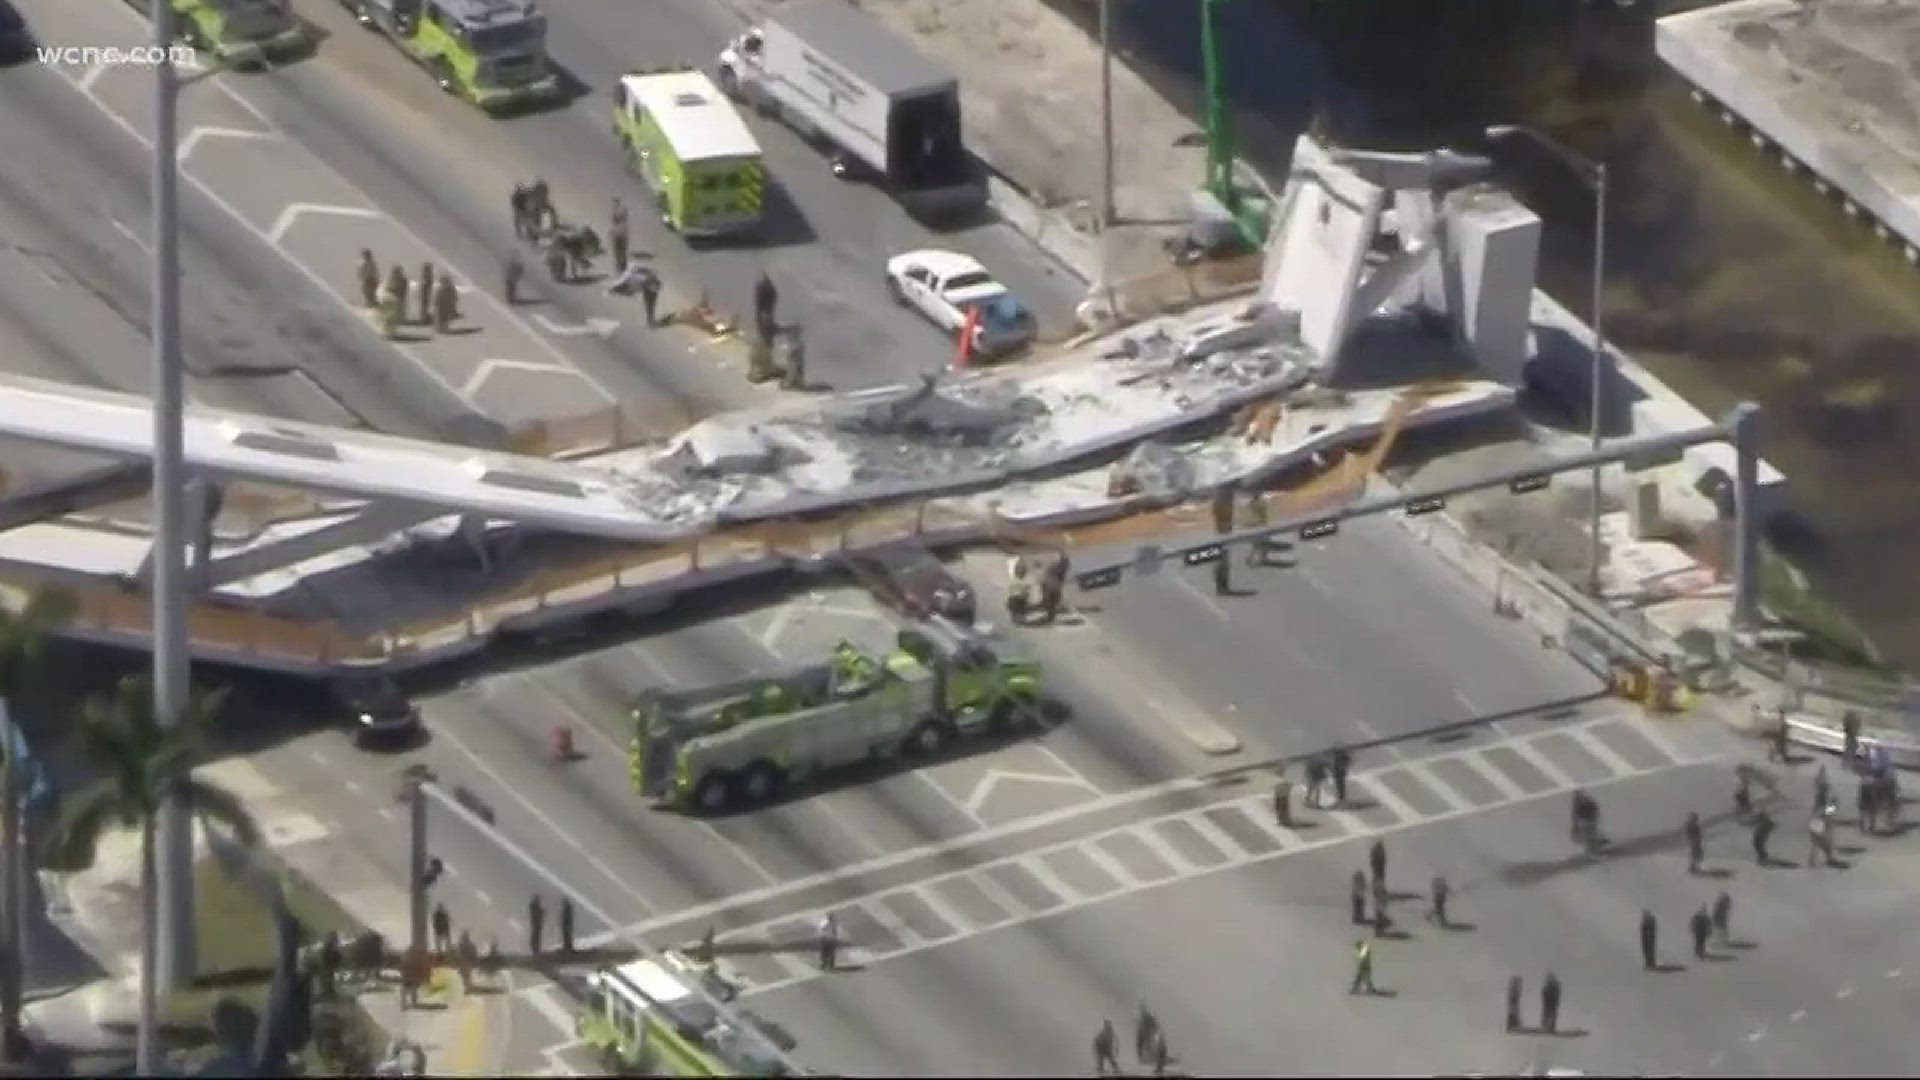 Questions are being raised about pedestrian bridge safety following the collapse in Miami